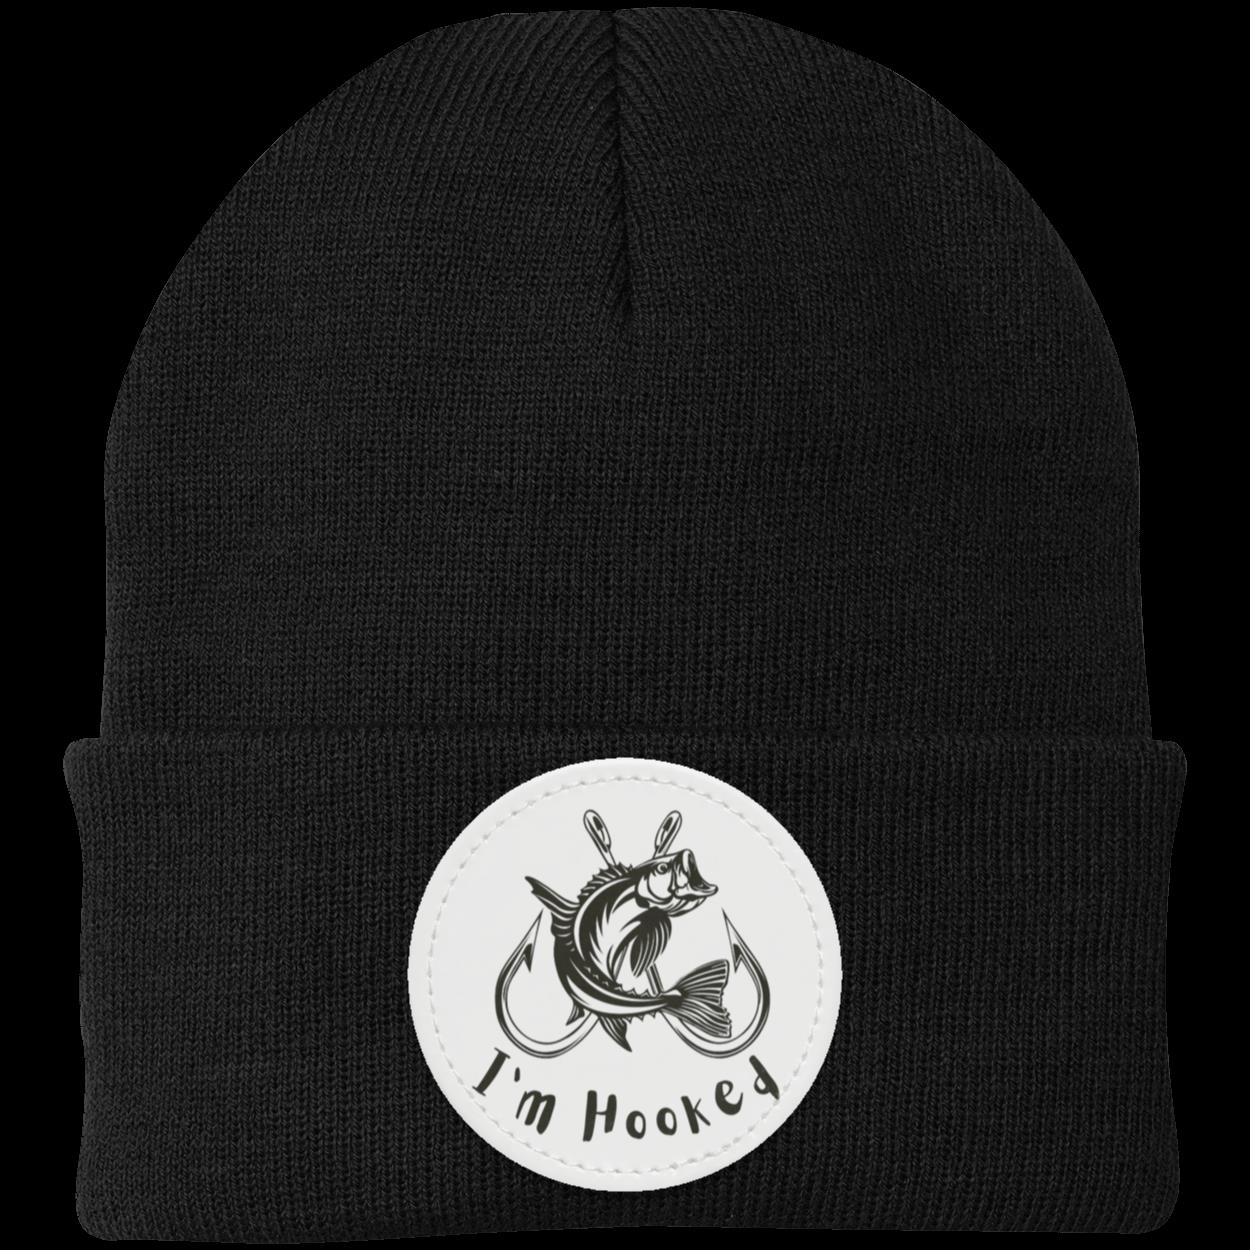 I'm Hooked Hat | For Fishing Lovers | Knit Cap - Patch